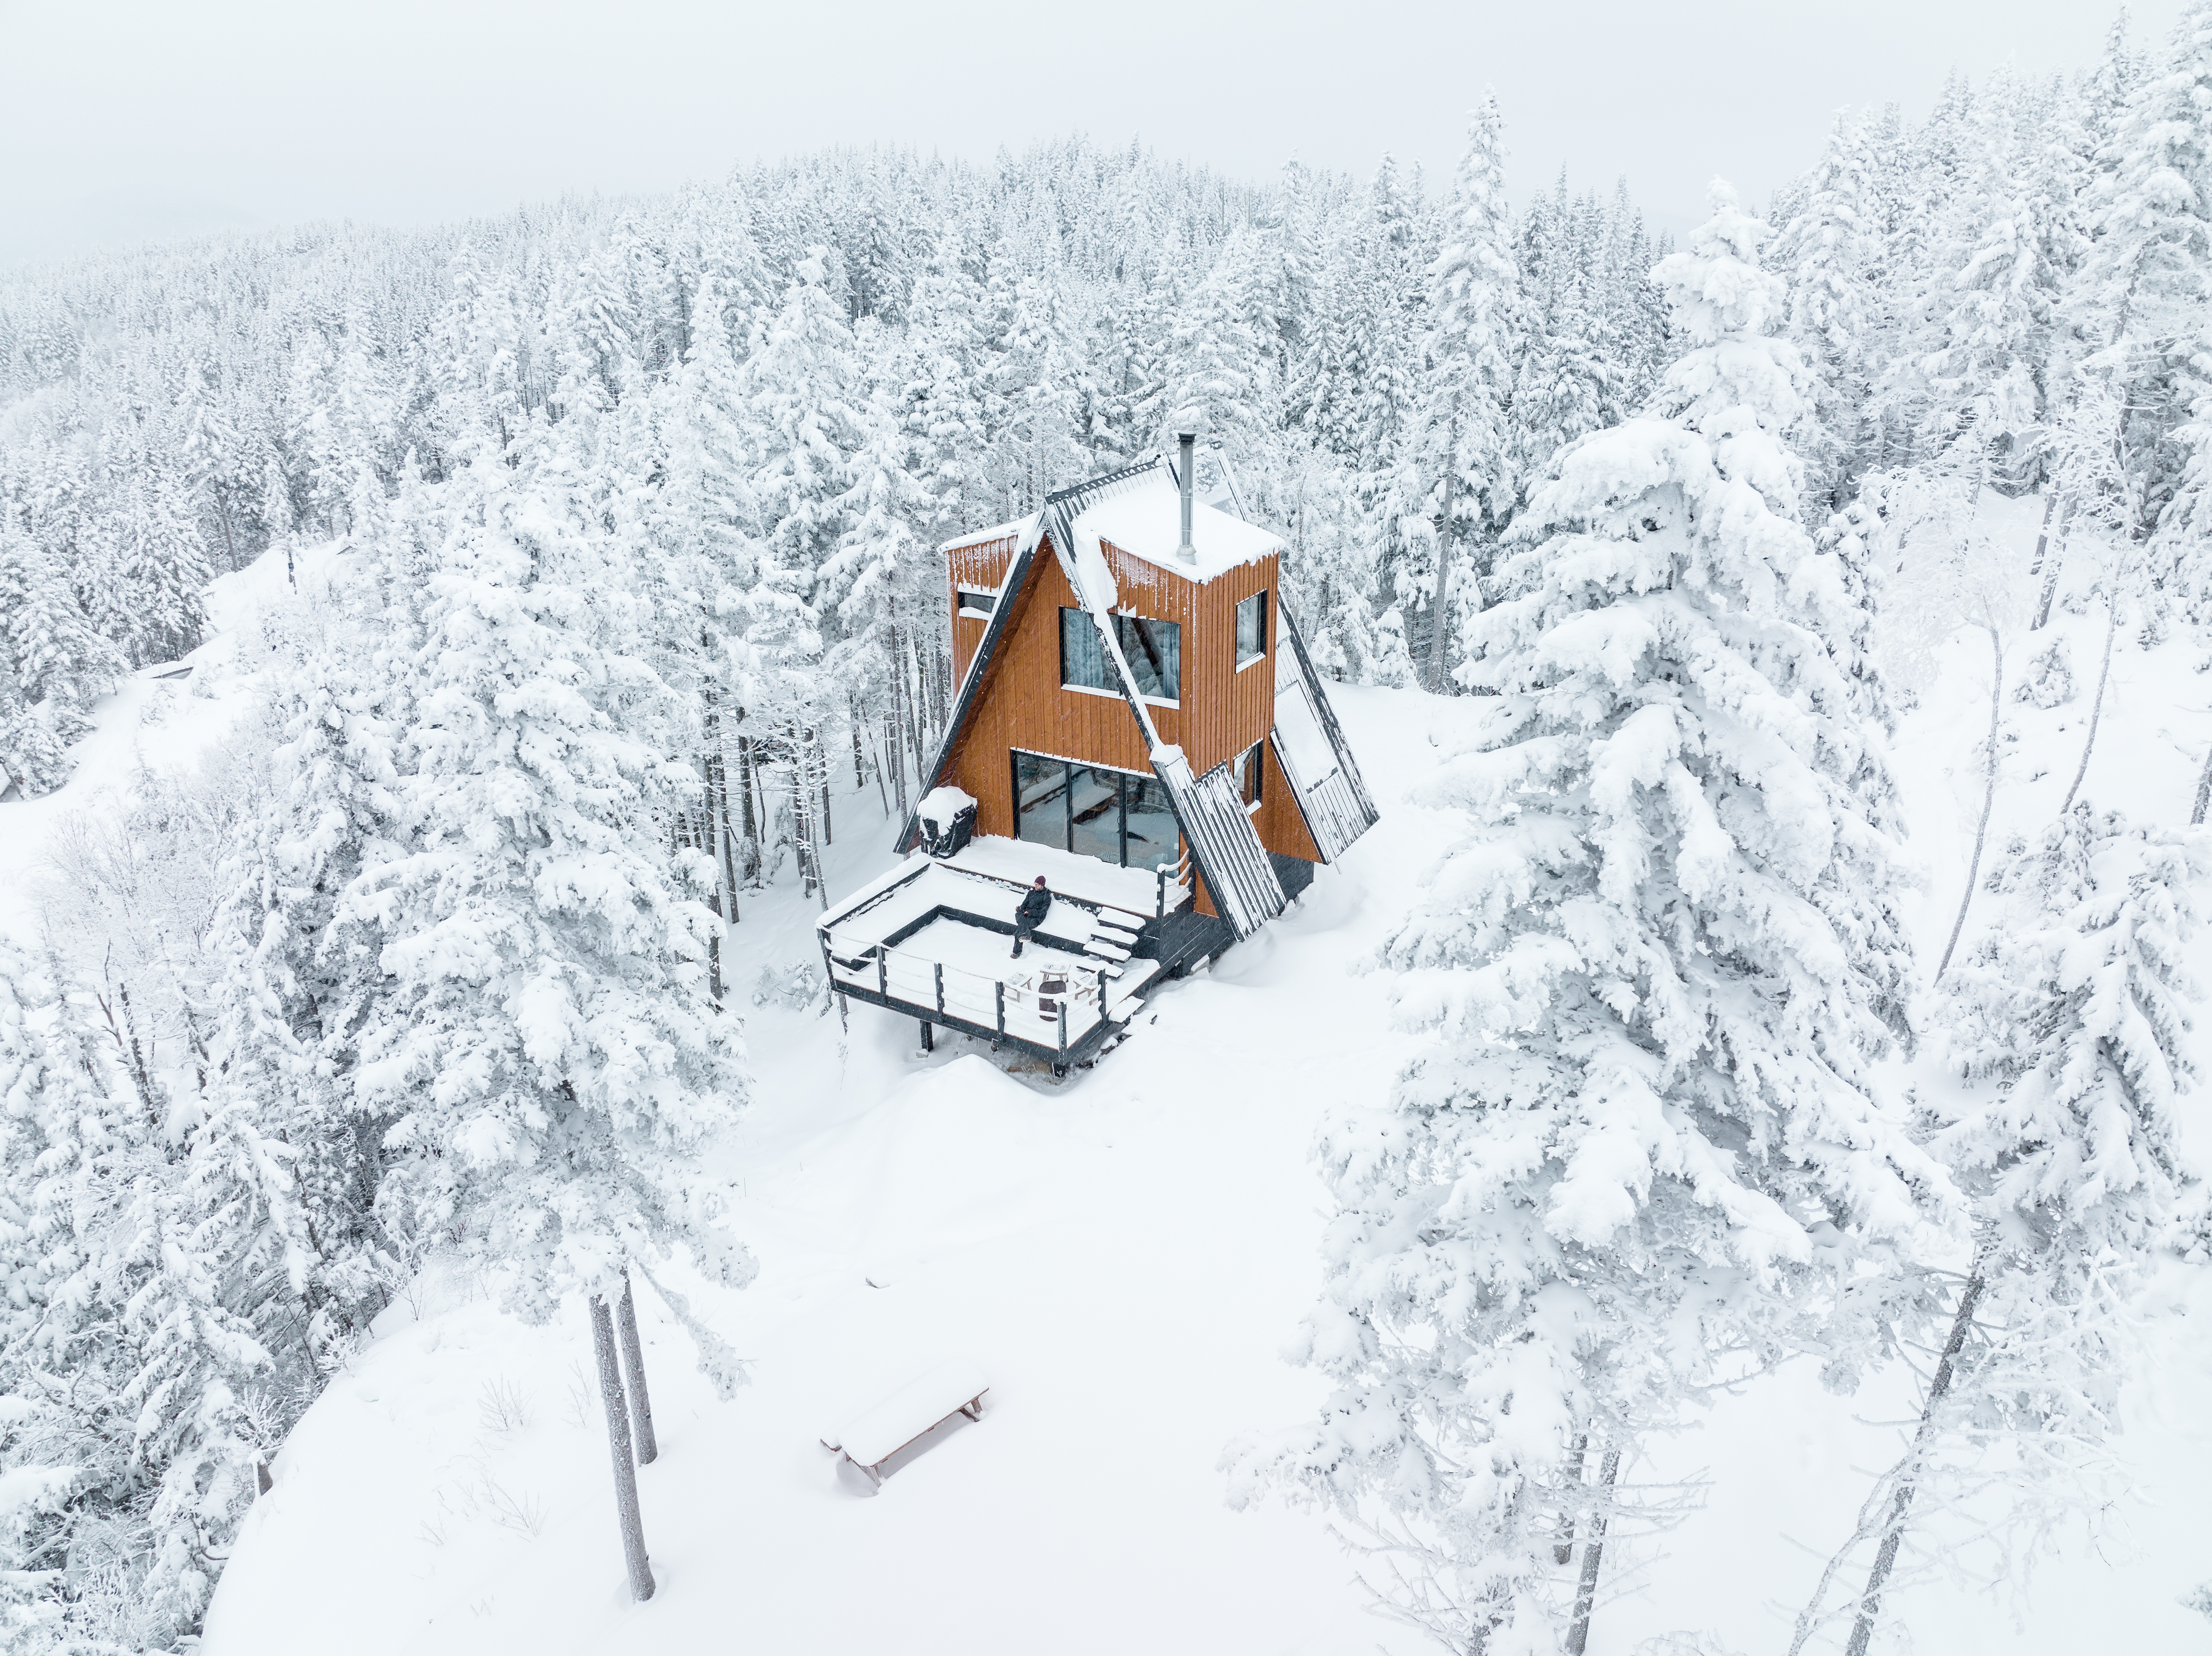 A wooden house sits in the middle of a snow drenched field, surrounded by a snowy forest.